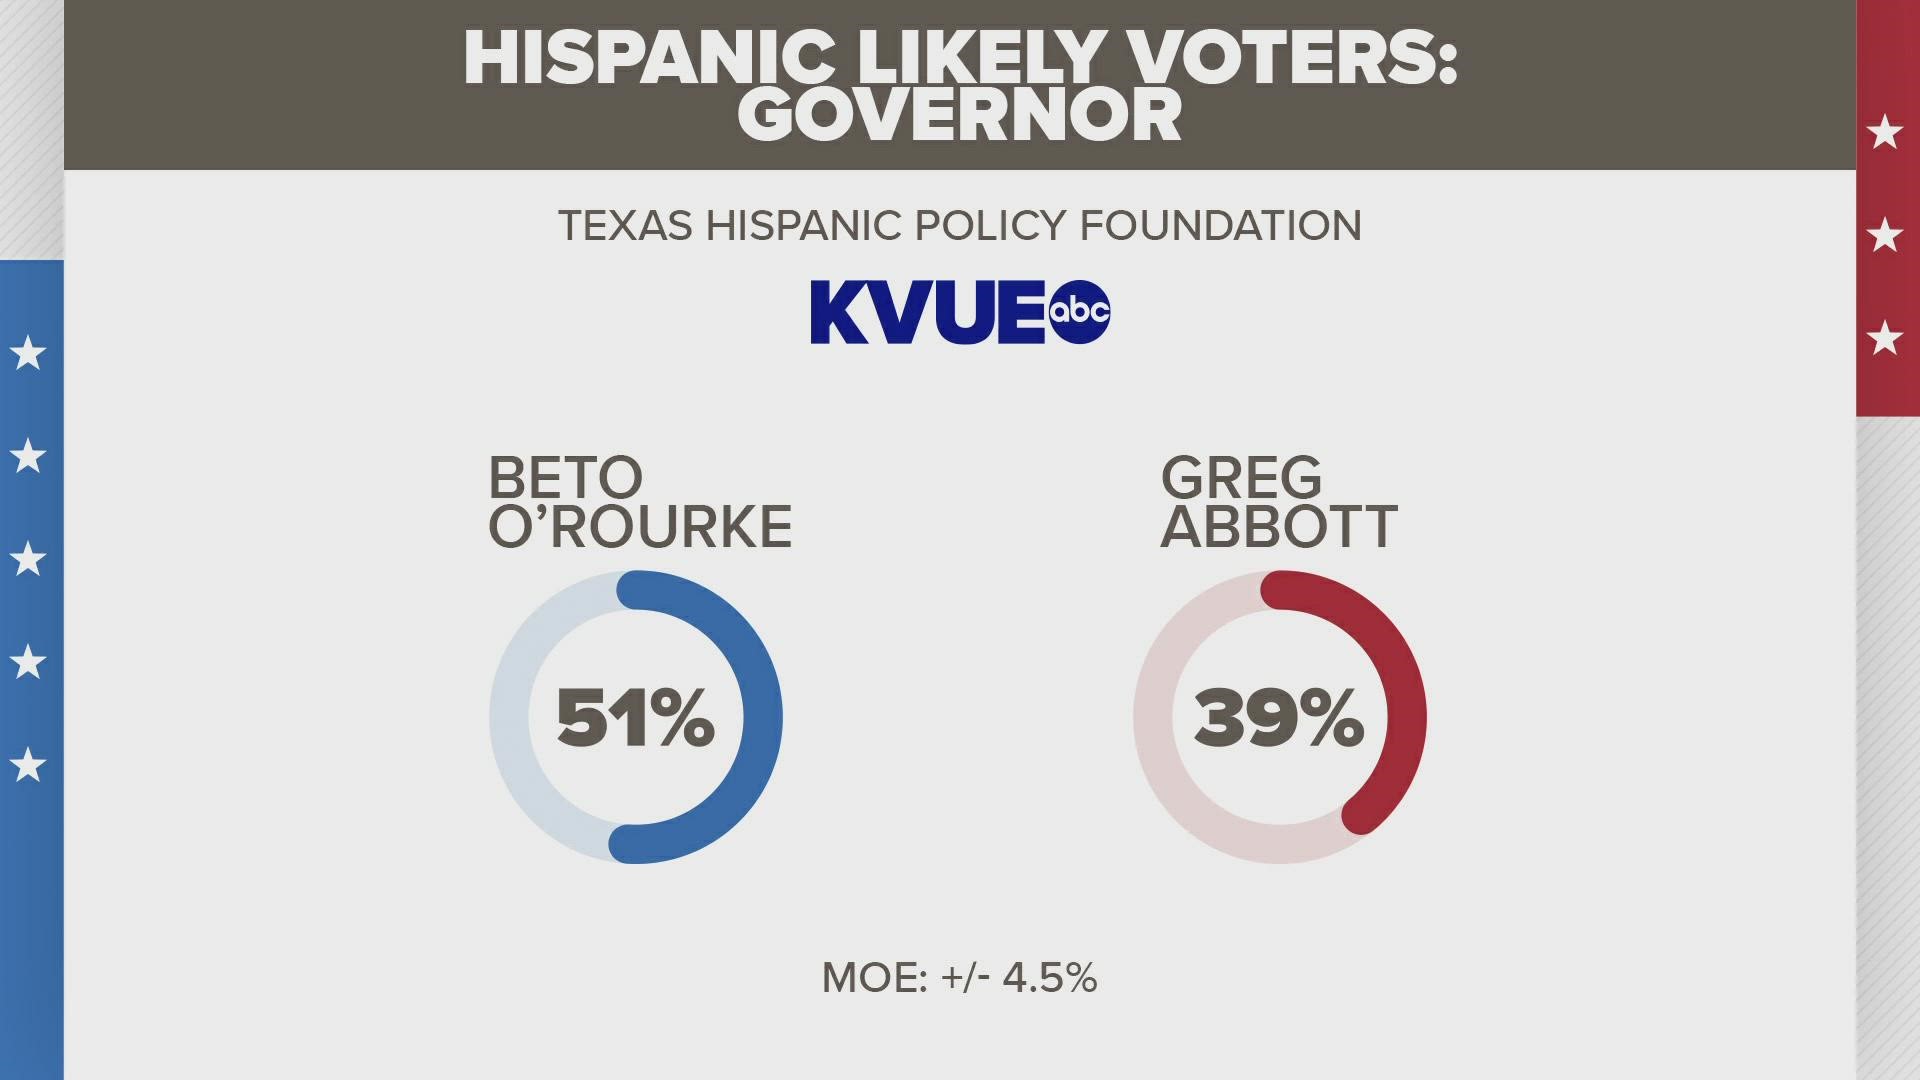 The poll shows likely Hispanic voters support Beto O'Rourke over Greg Abbott. The poll also looked at specific Texas border policies.